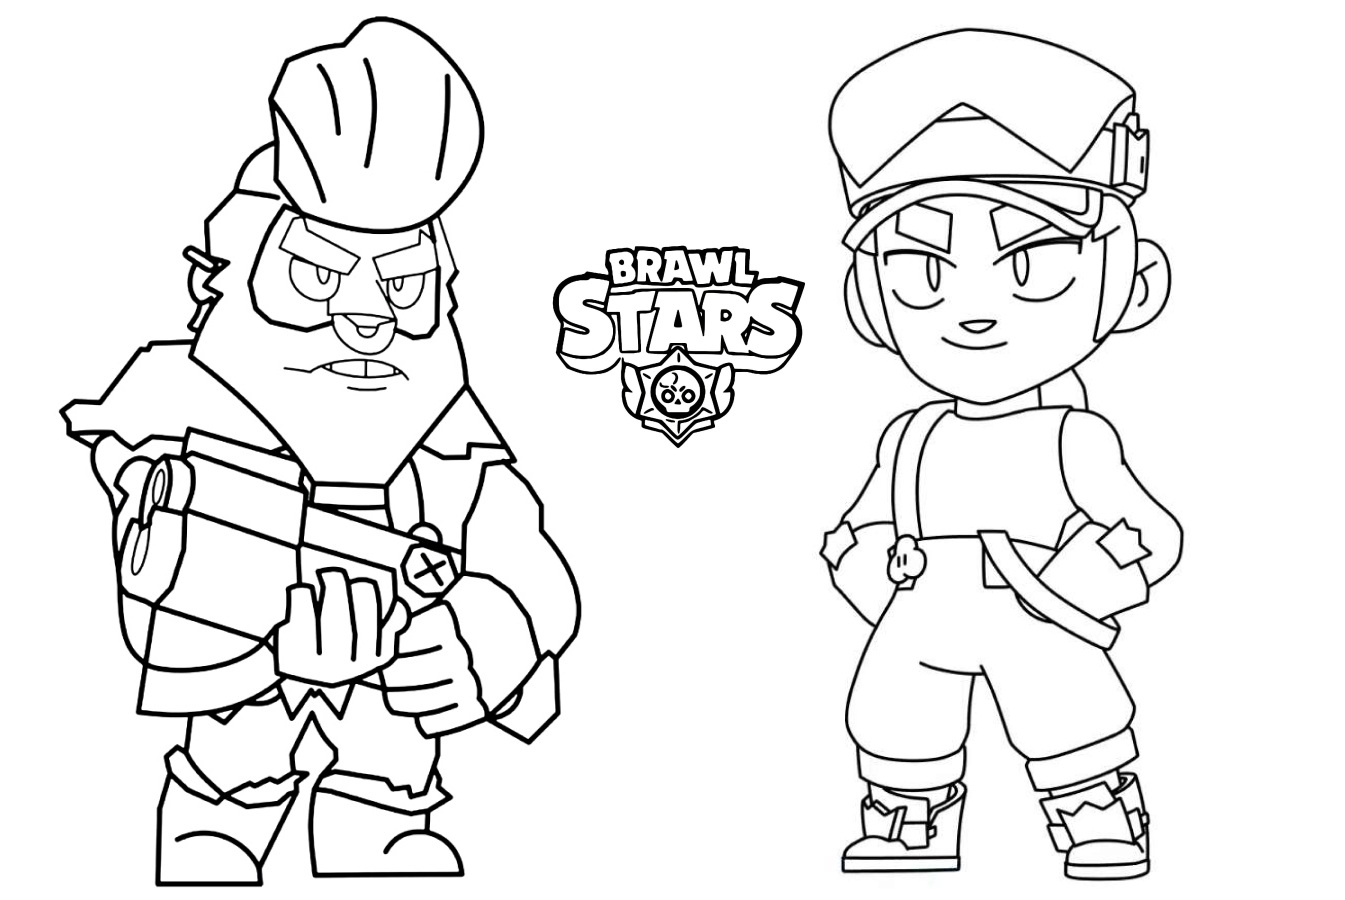 Coloring page Brawl Stars Fang and a Colt